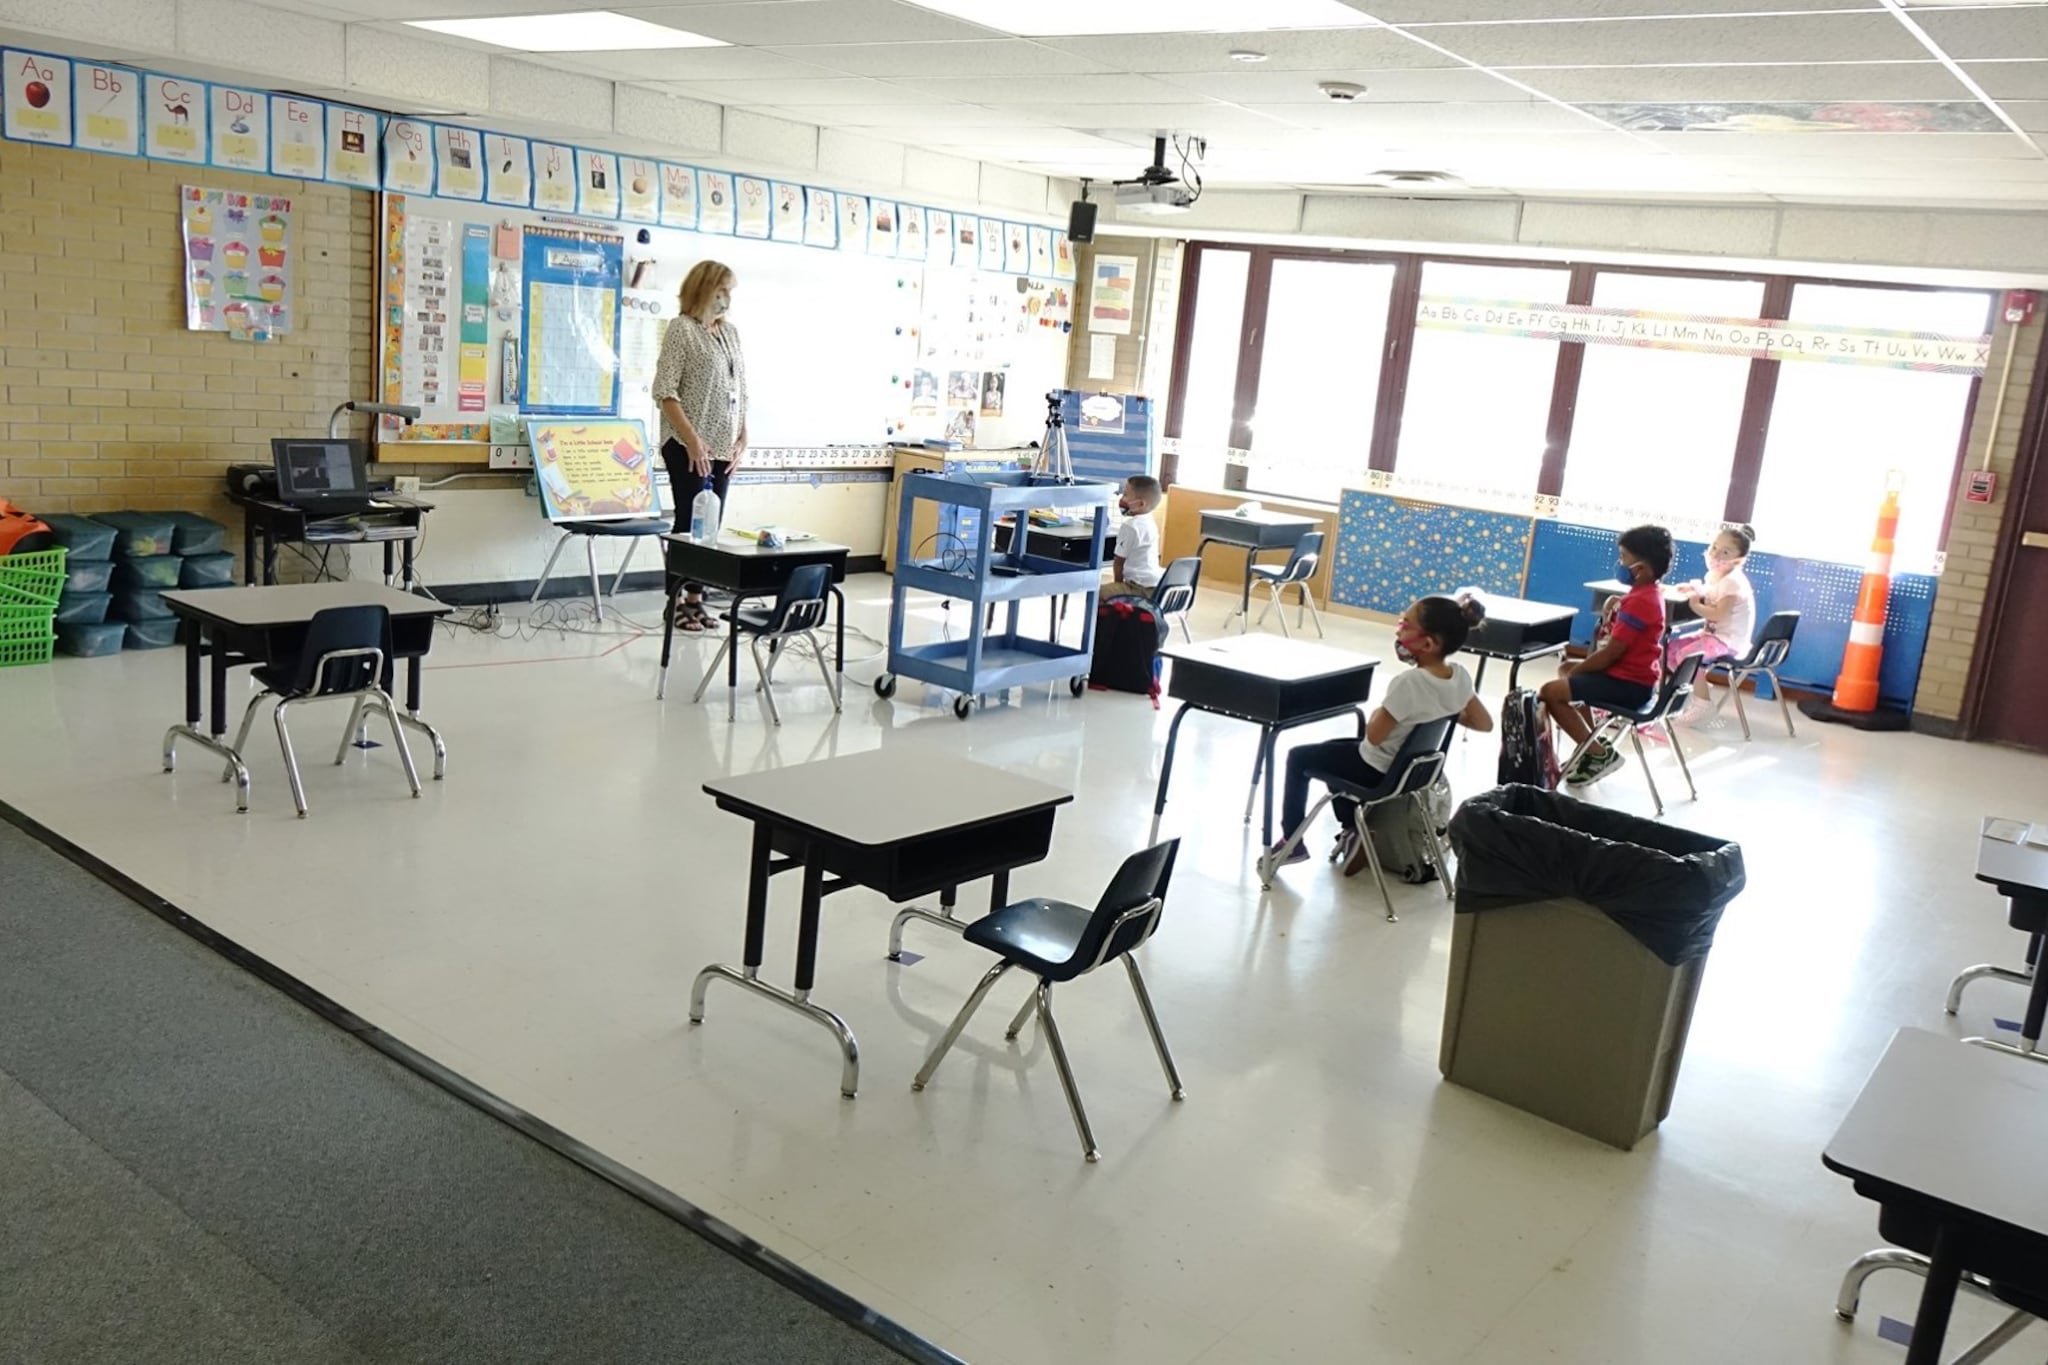 A school classroom with several students seated at desks and a teacher at the front of the room.